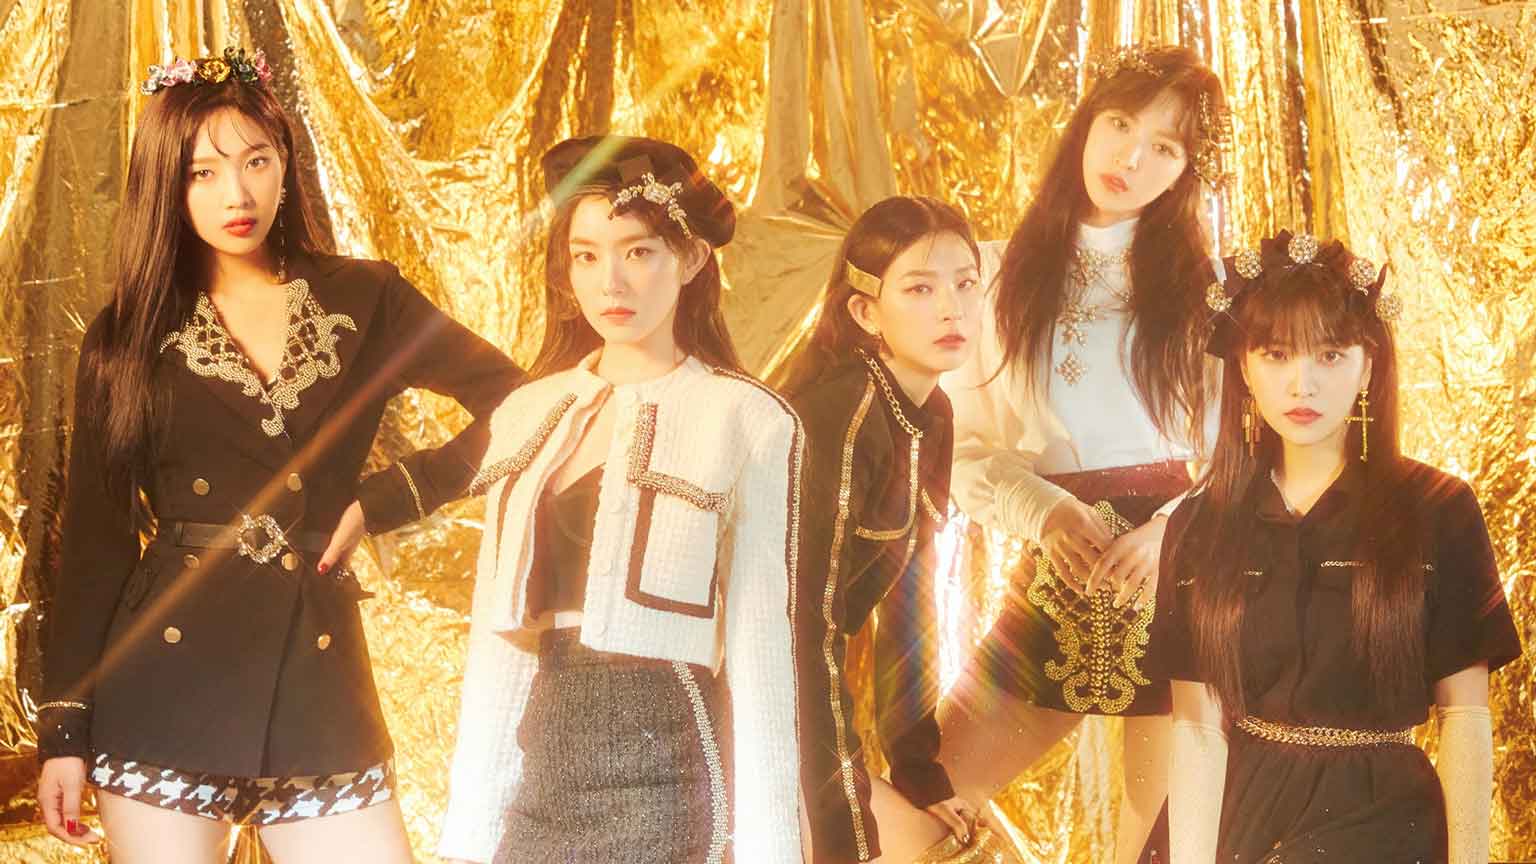 Here Are 7 Red Velvet Music Videos To Watch To Celebrate Their 7th Anniversary And Upcoming Comeback